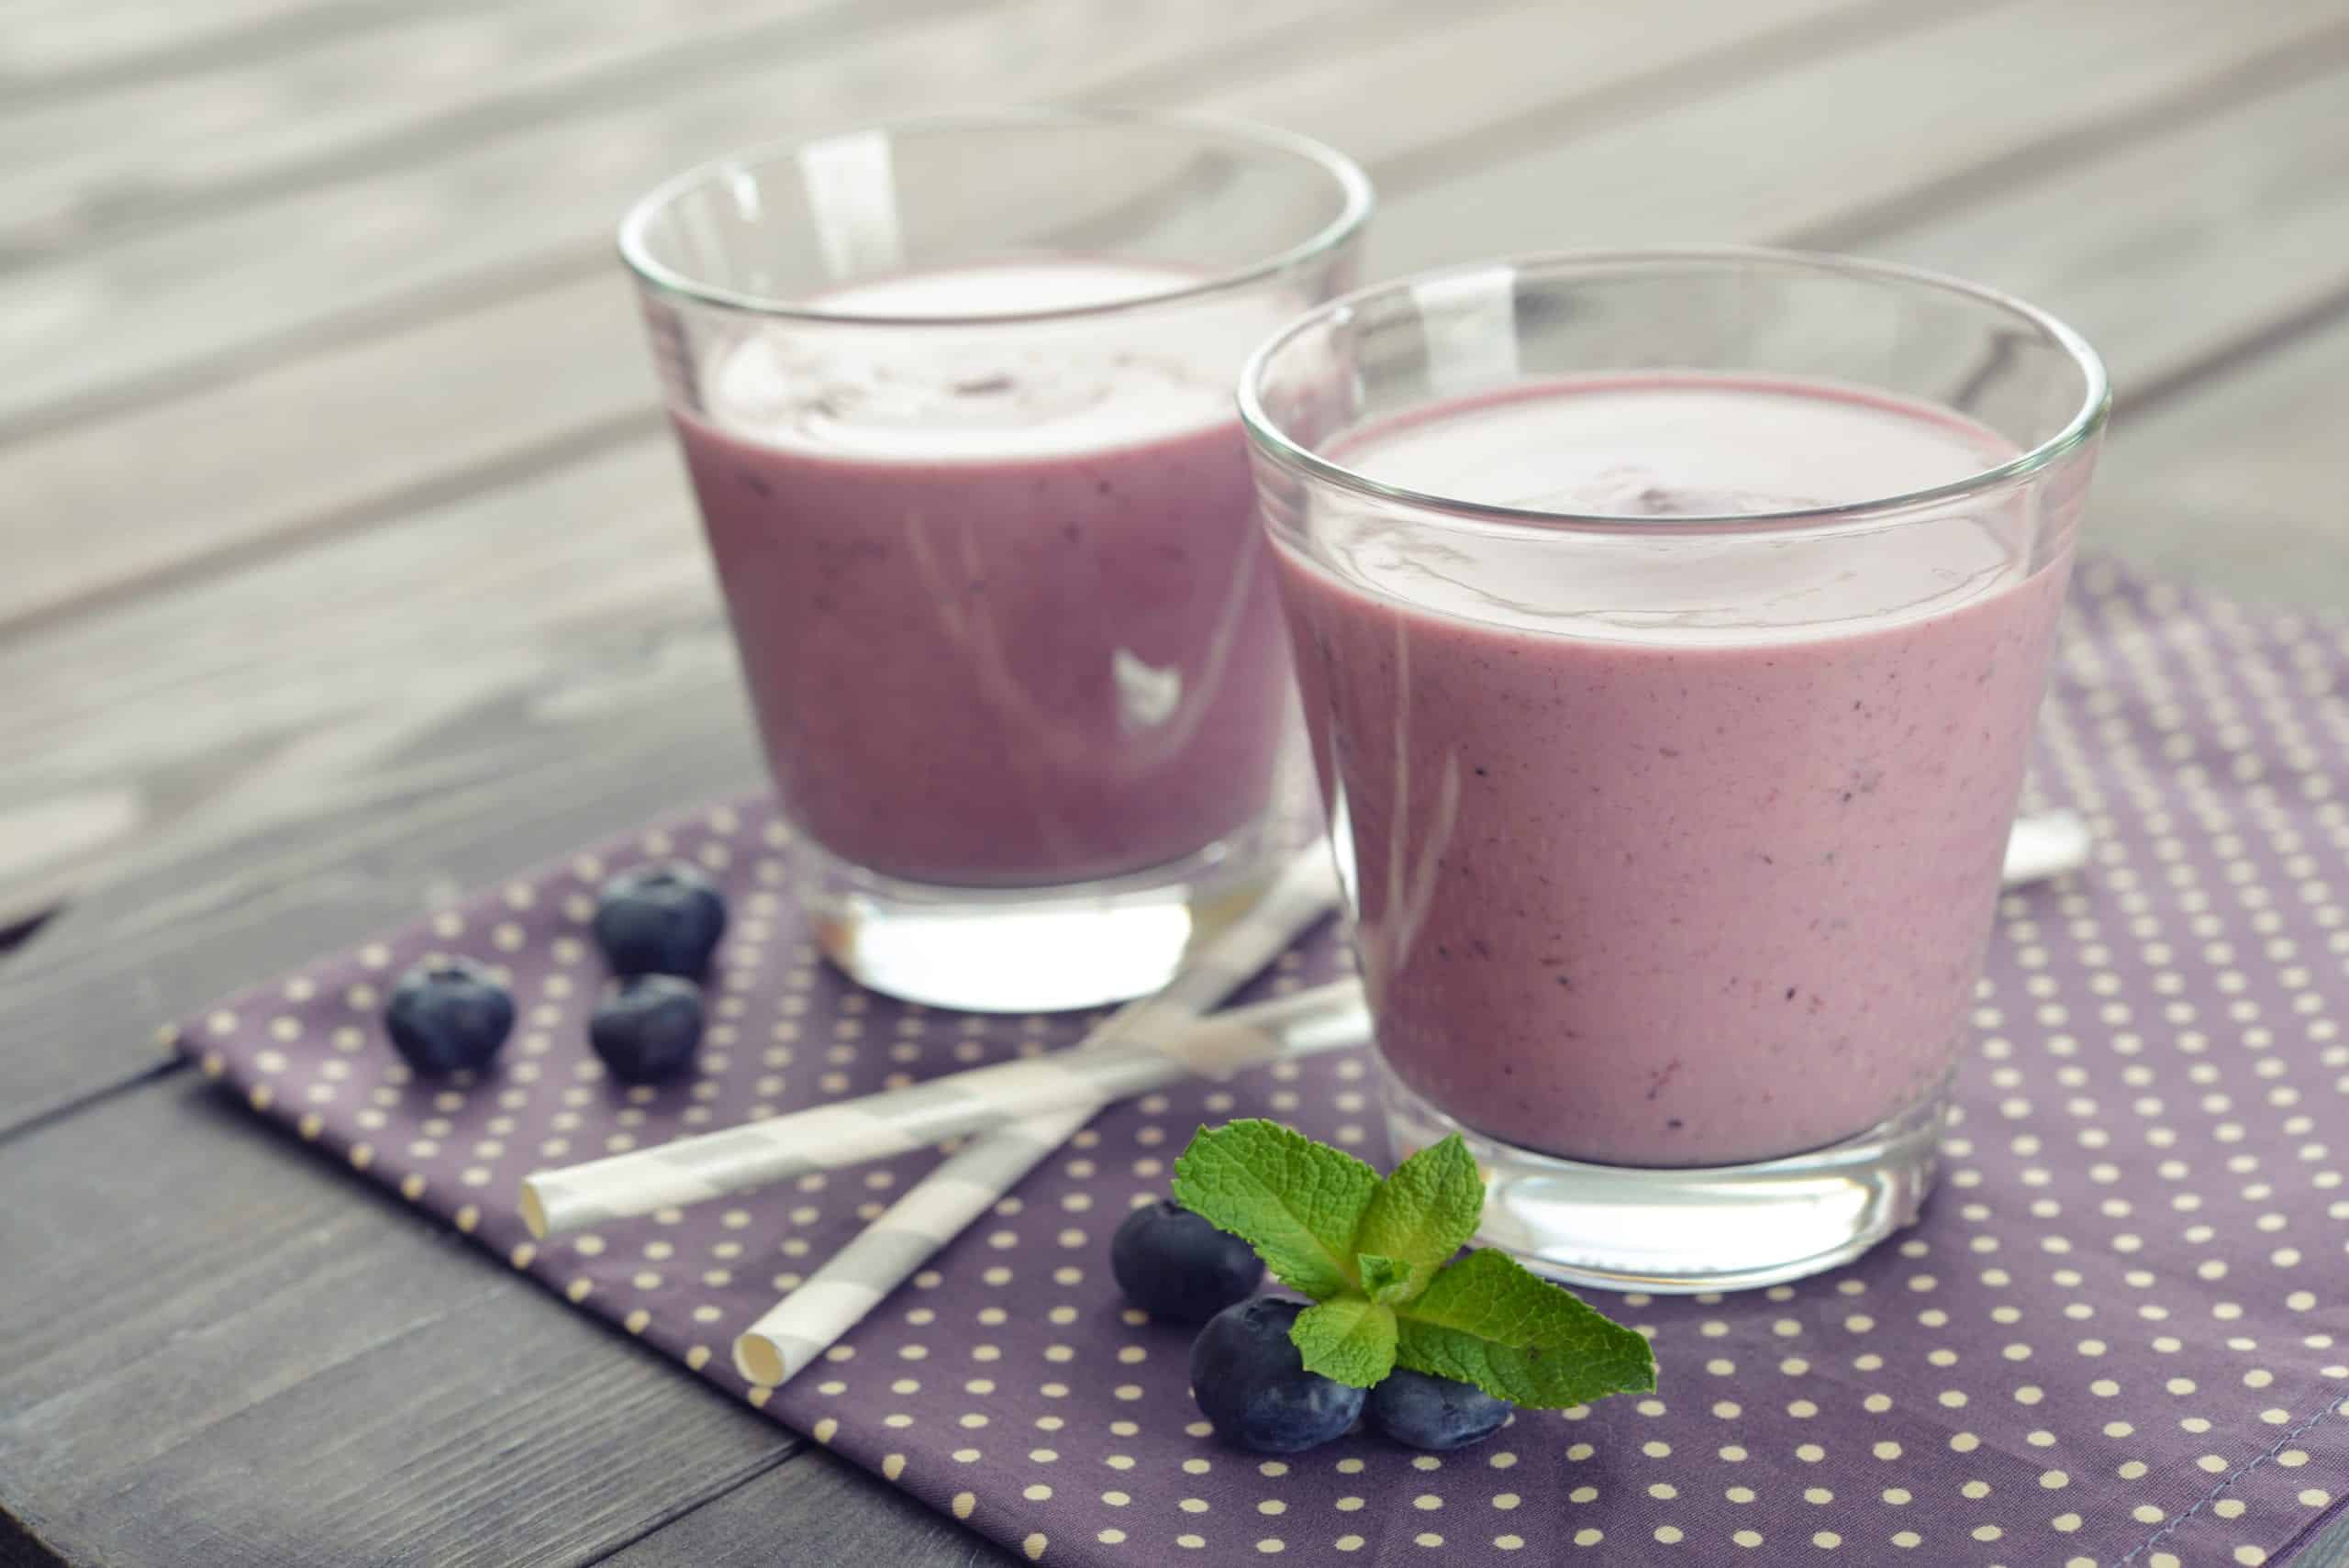 Blueberries and Cream Smoothie